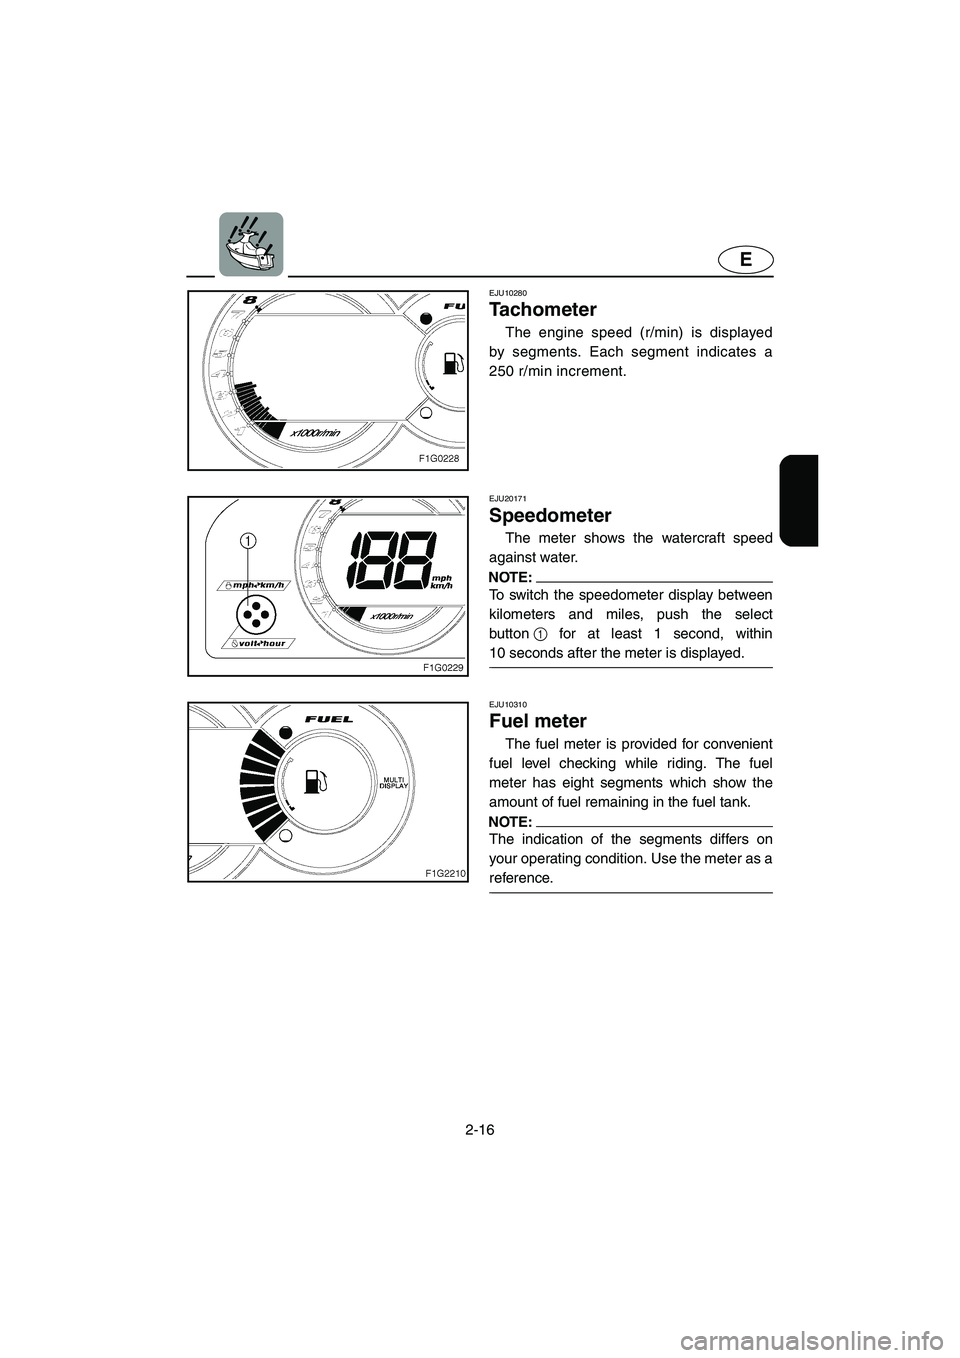 YAMAHA GP1300R 2005  Owners Manual 2-16
E
EJU10280 
Tachometer  
The engine speed (r/min) is displayed
by segments. Each segment indicates a
250 r/min increment. 
EJU20171 
Speedometer 
The meter shows the watercraft speed
against wate